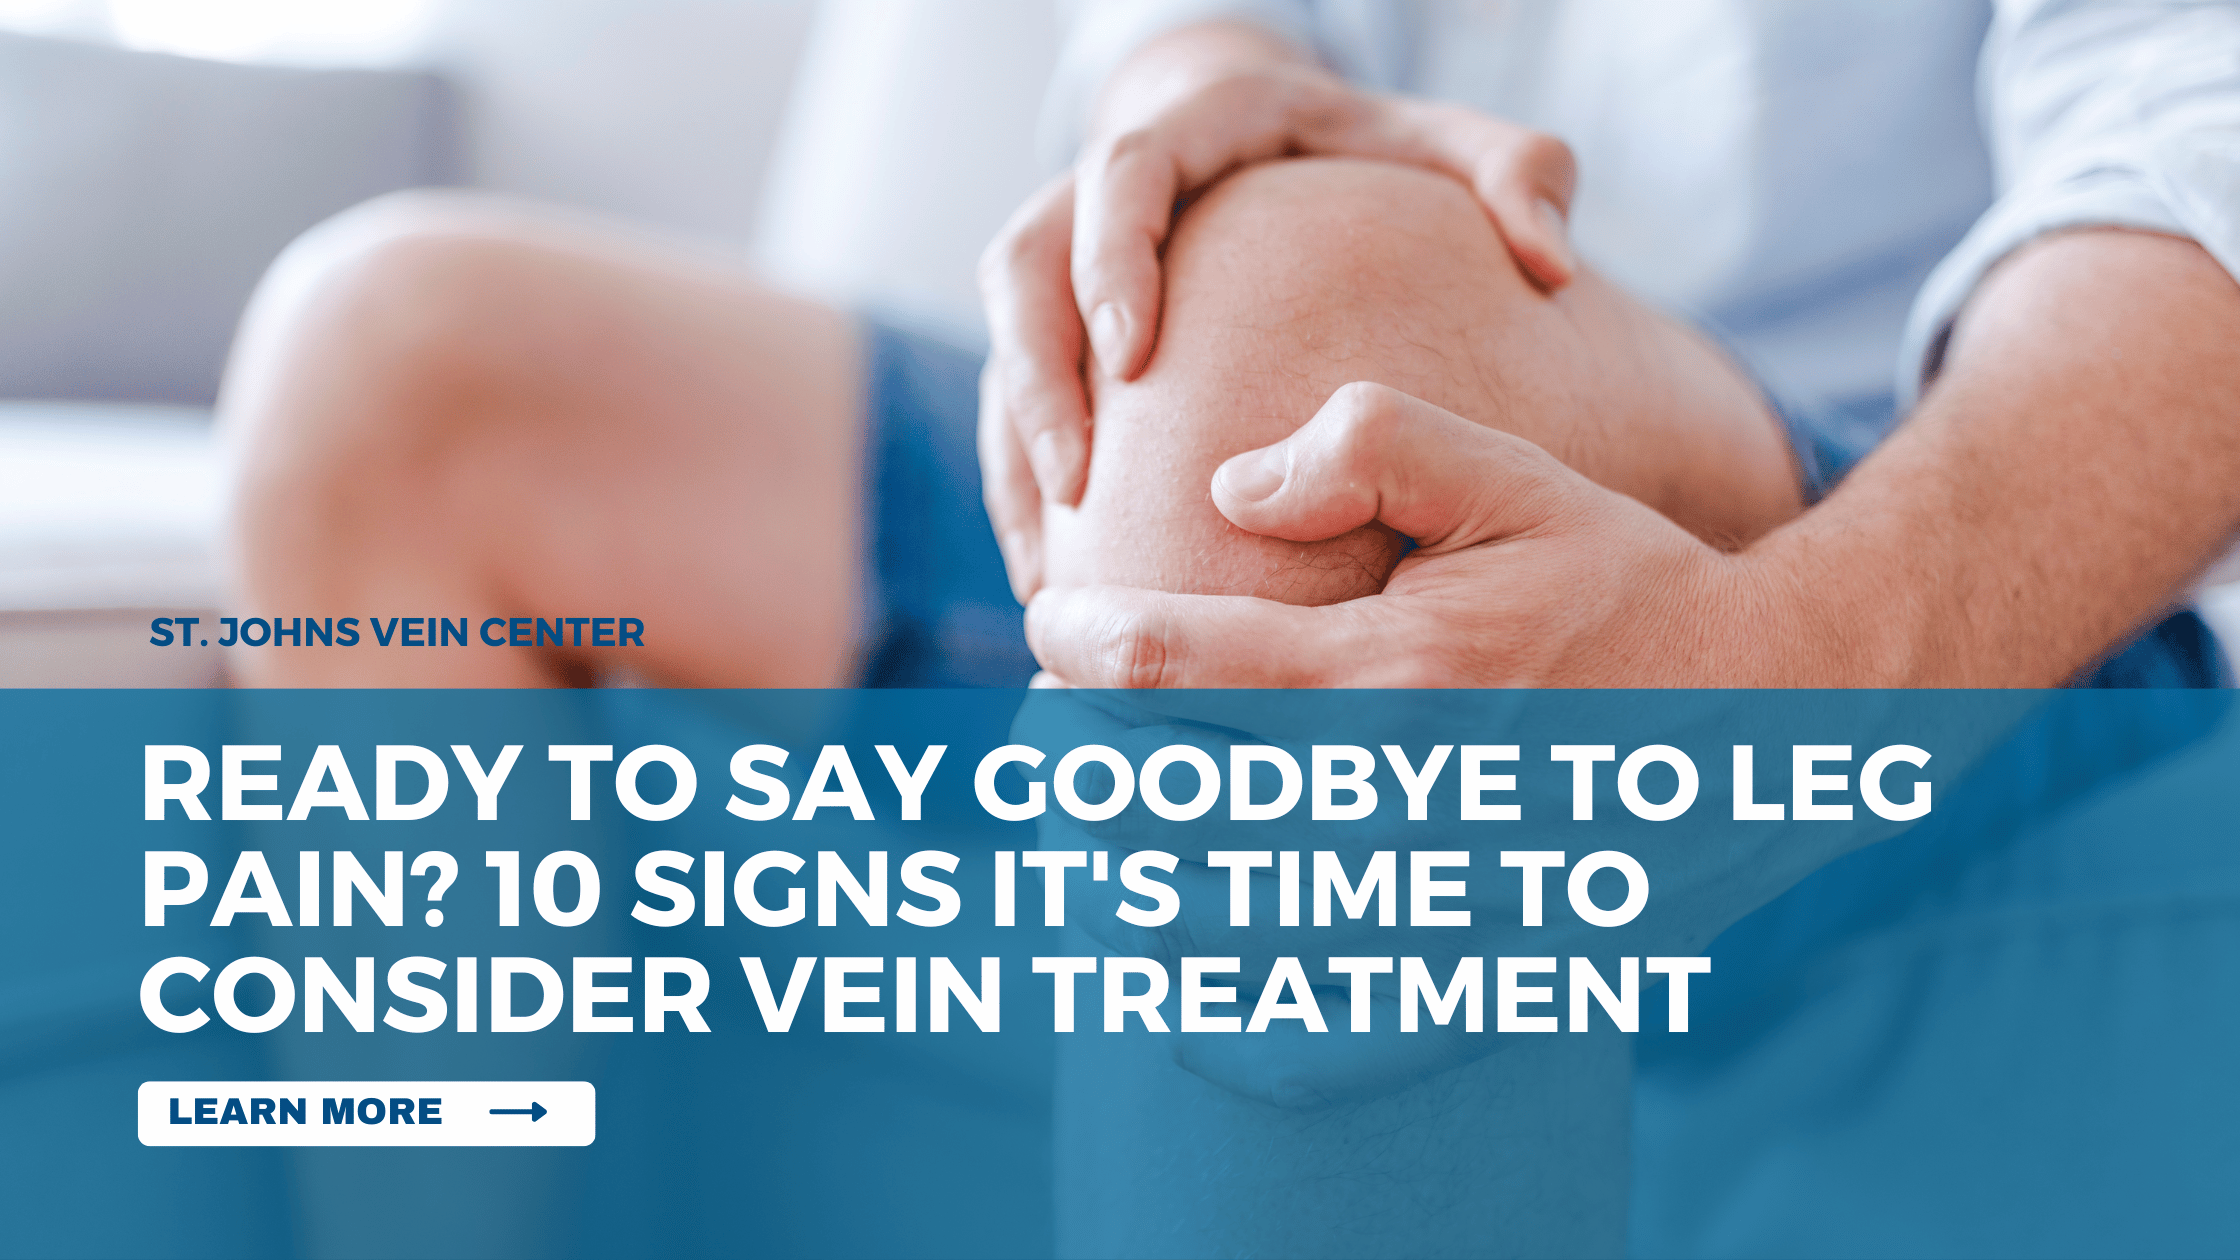 Ready to Say Goodbye to Leg Pain? 10 Signs It's Time to Consider Vein Treatment